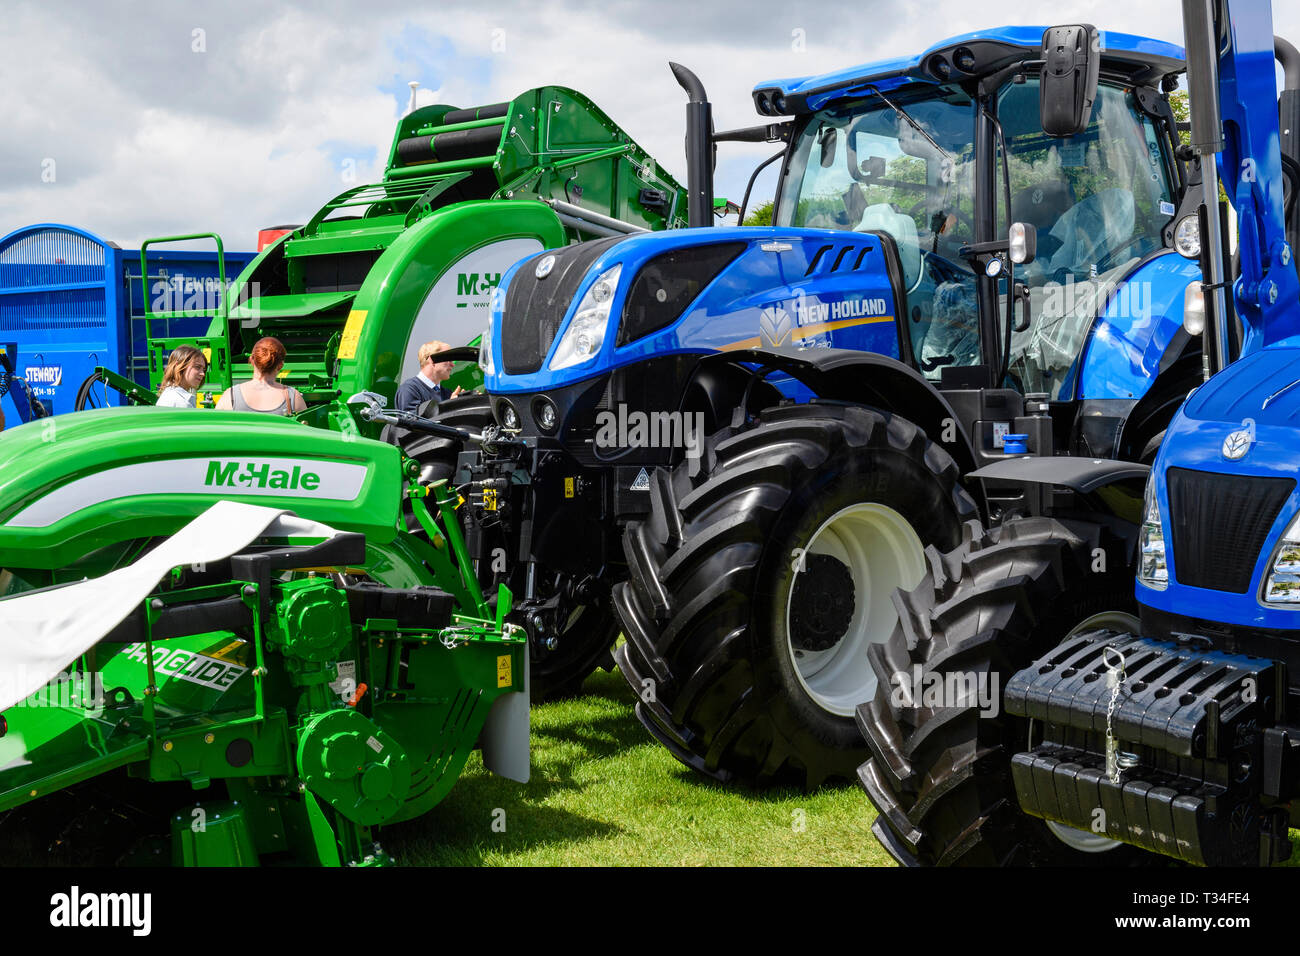 Display of agricultural machinery (New Holland tractors, McHale baler & mower) parked side by side on trade stand - Great Yorkshire Show, England, UK. Stock Photo